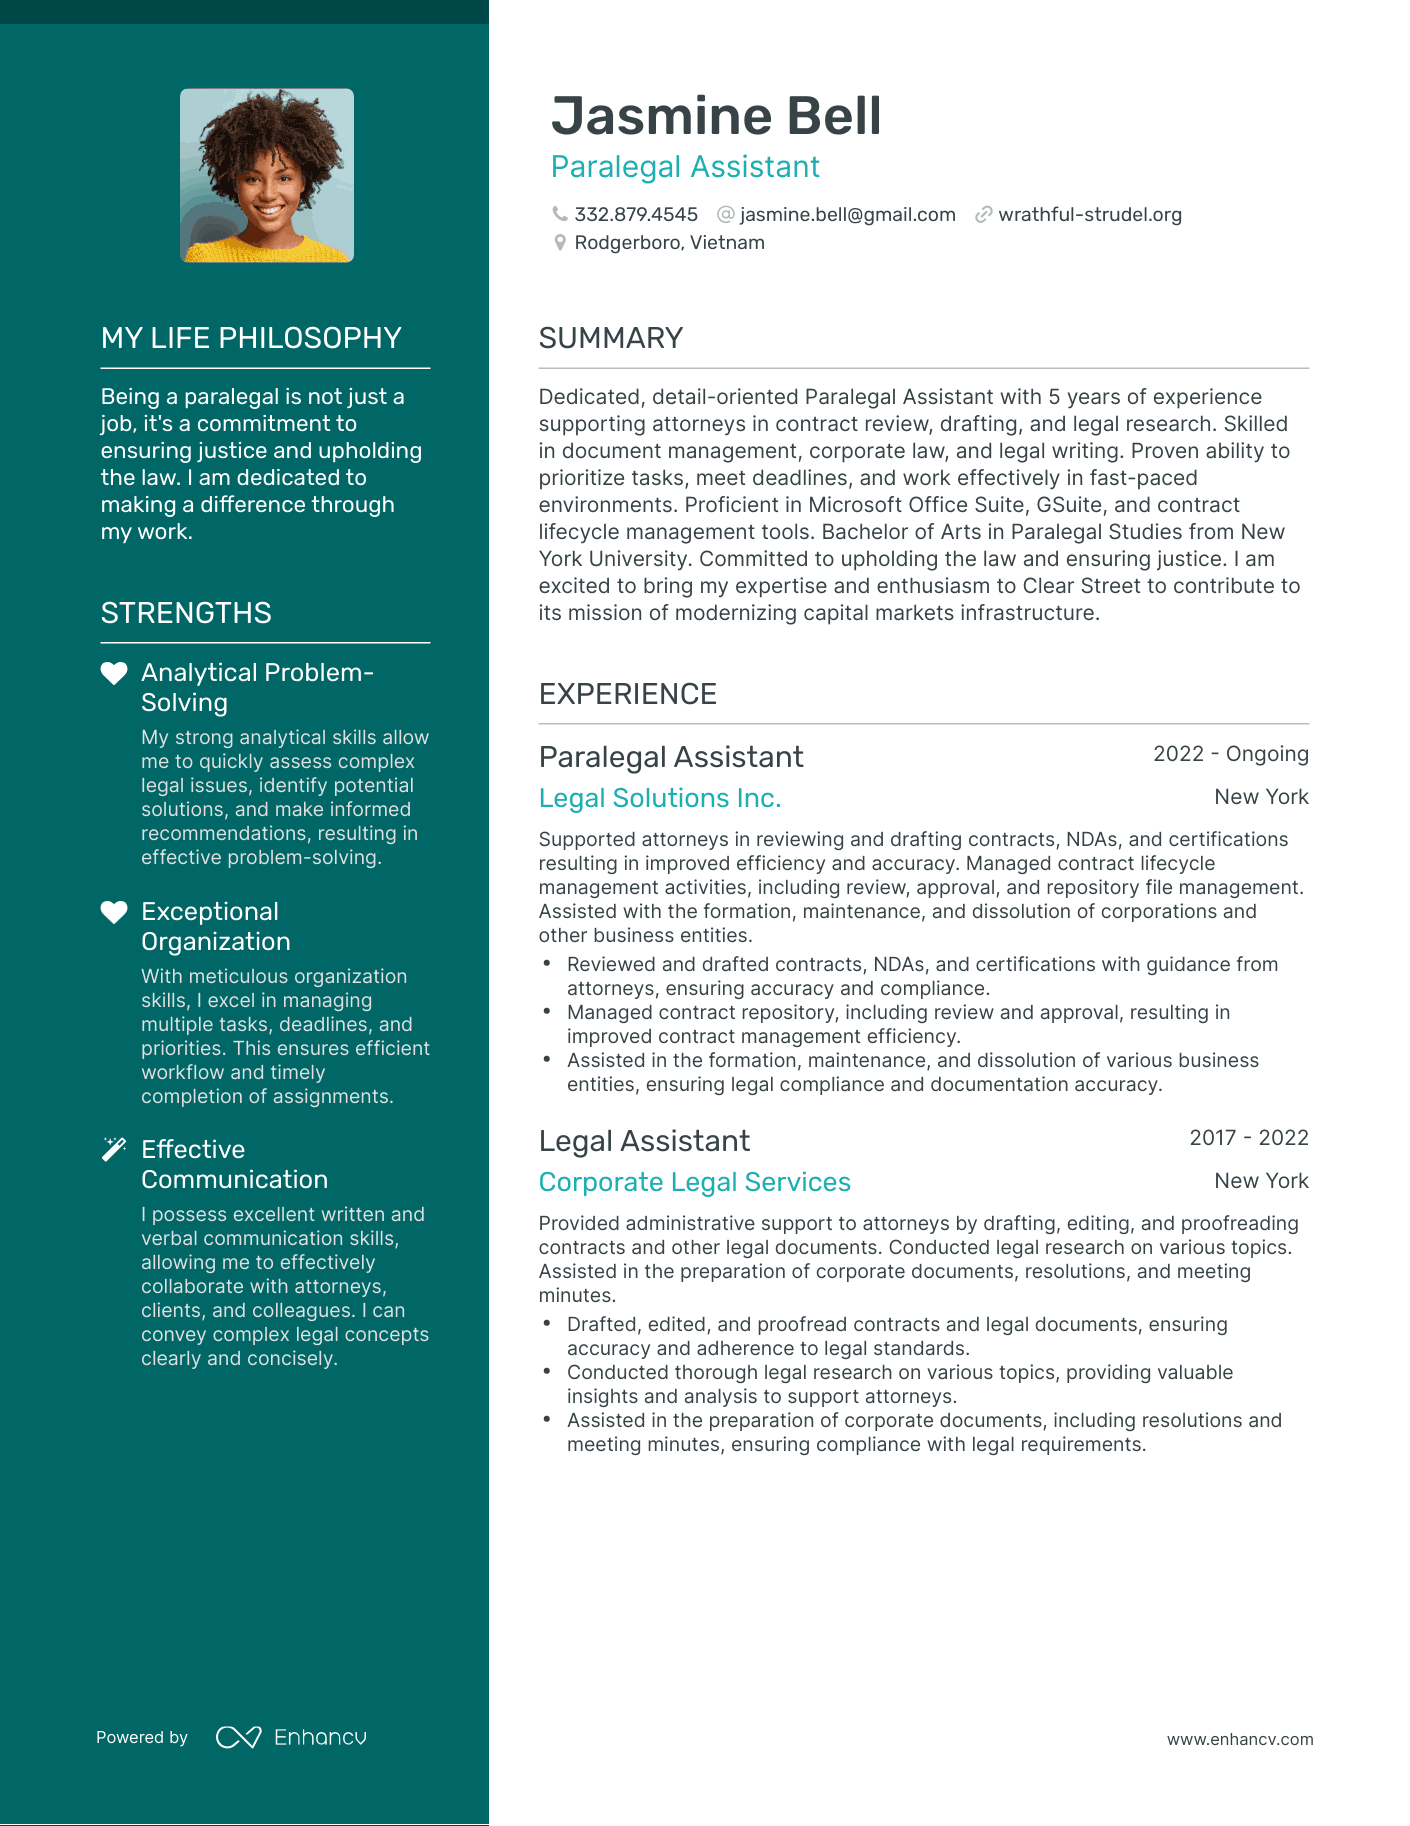 Paralegal Assistant resume example